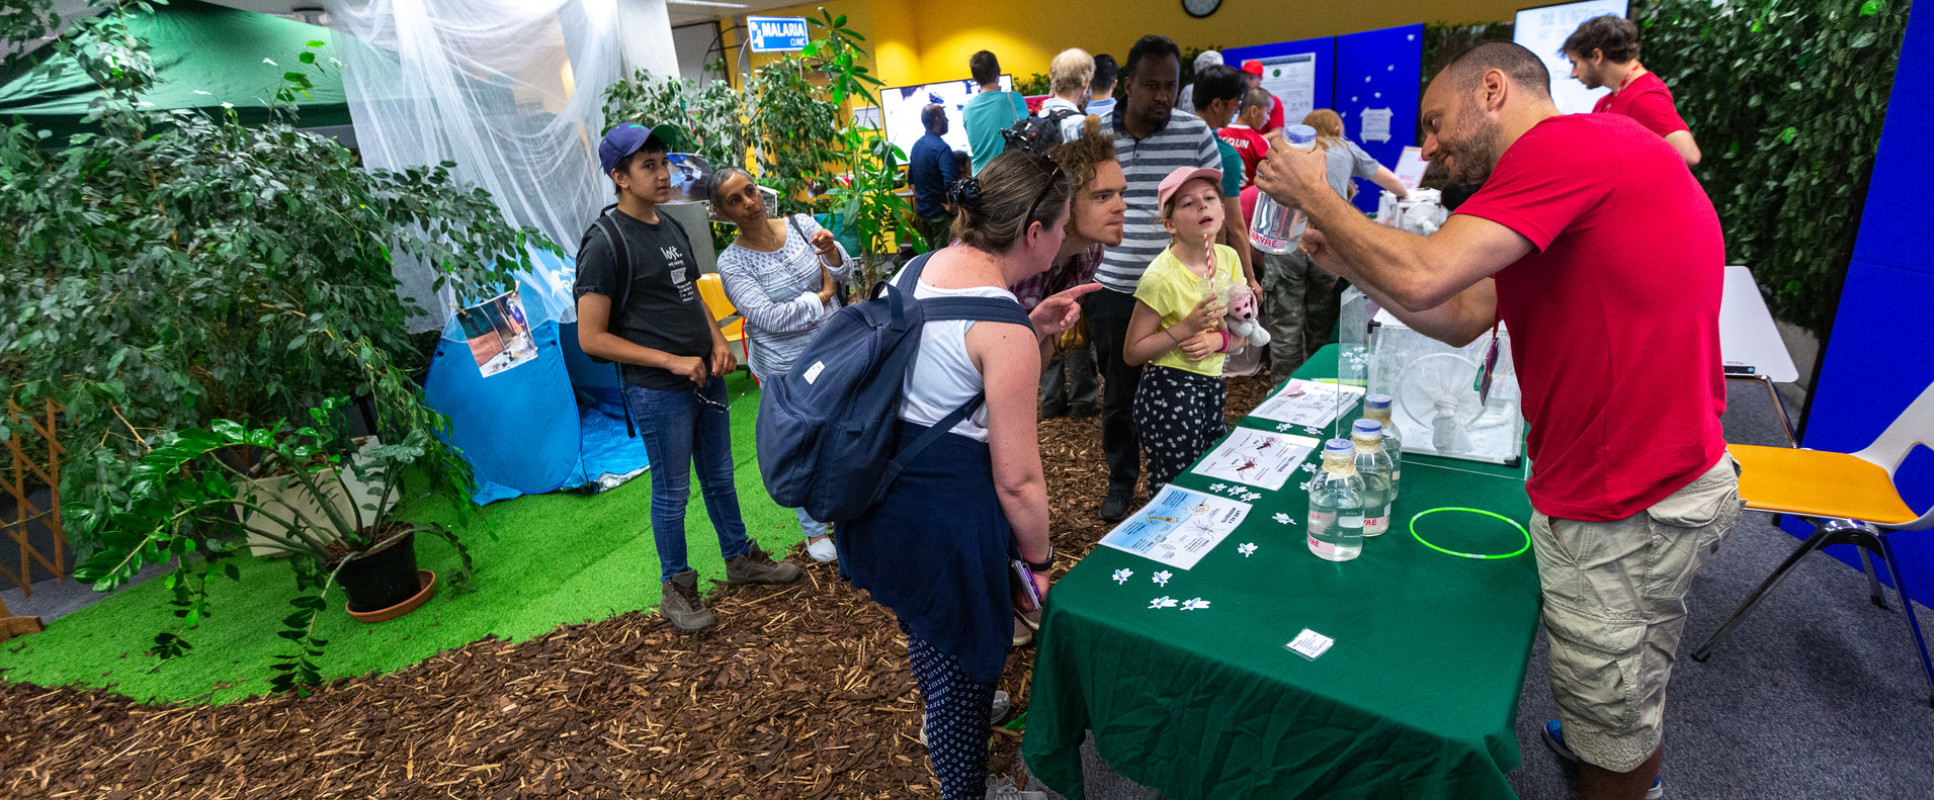 Visitors explore the Greener Futures Zone at the Great Exhibition Road Festival 2019.